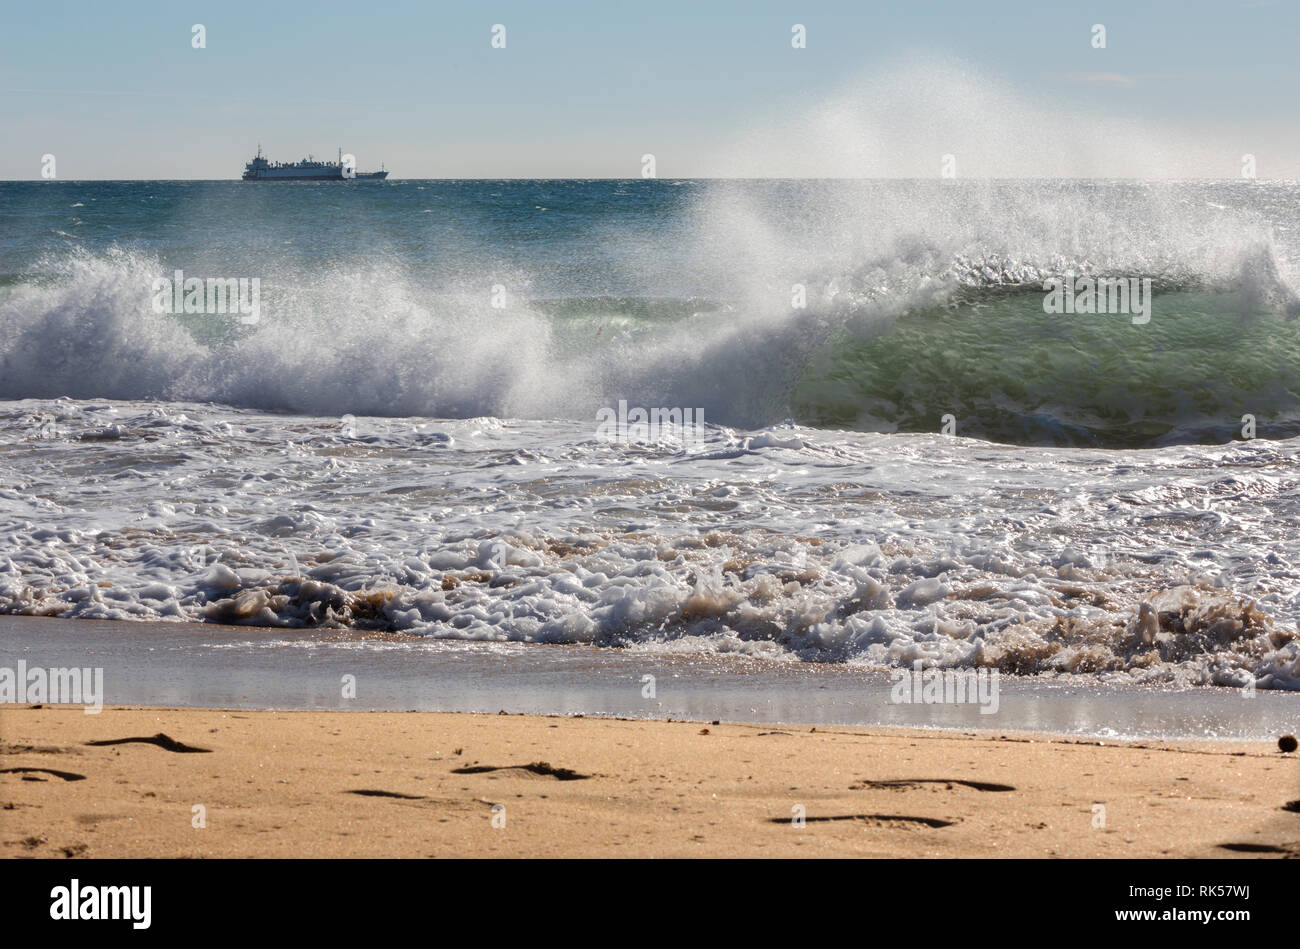 Palma de Mallorca - The big wave and the cargo in background. Stock Photo